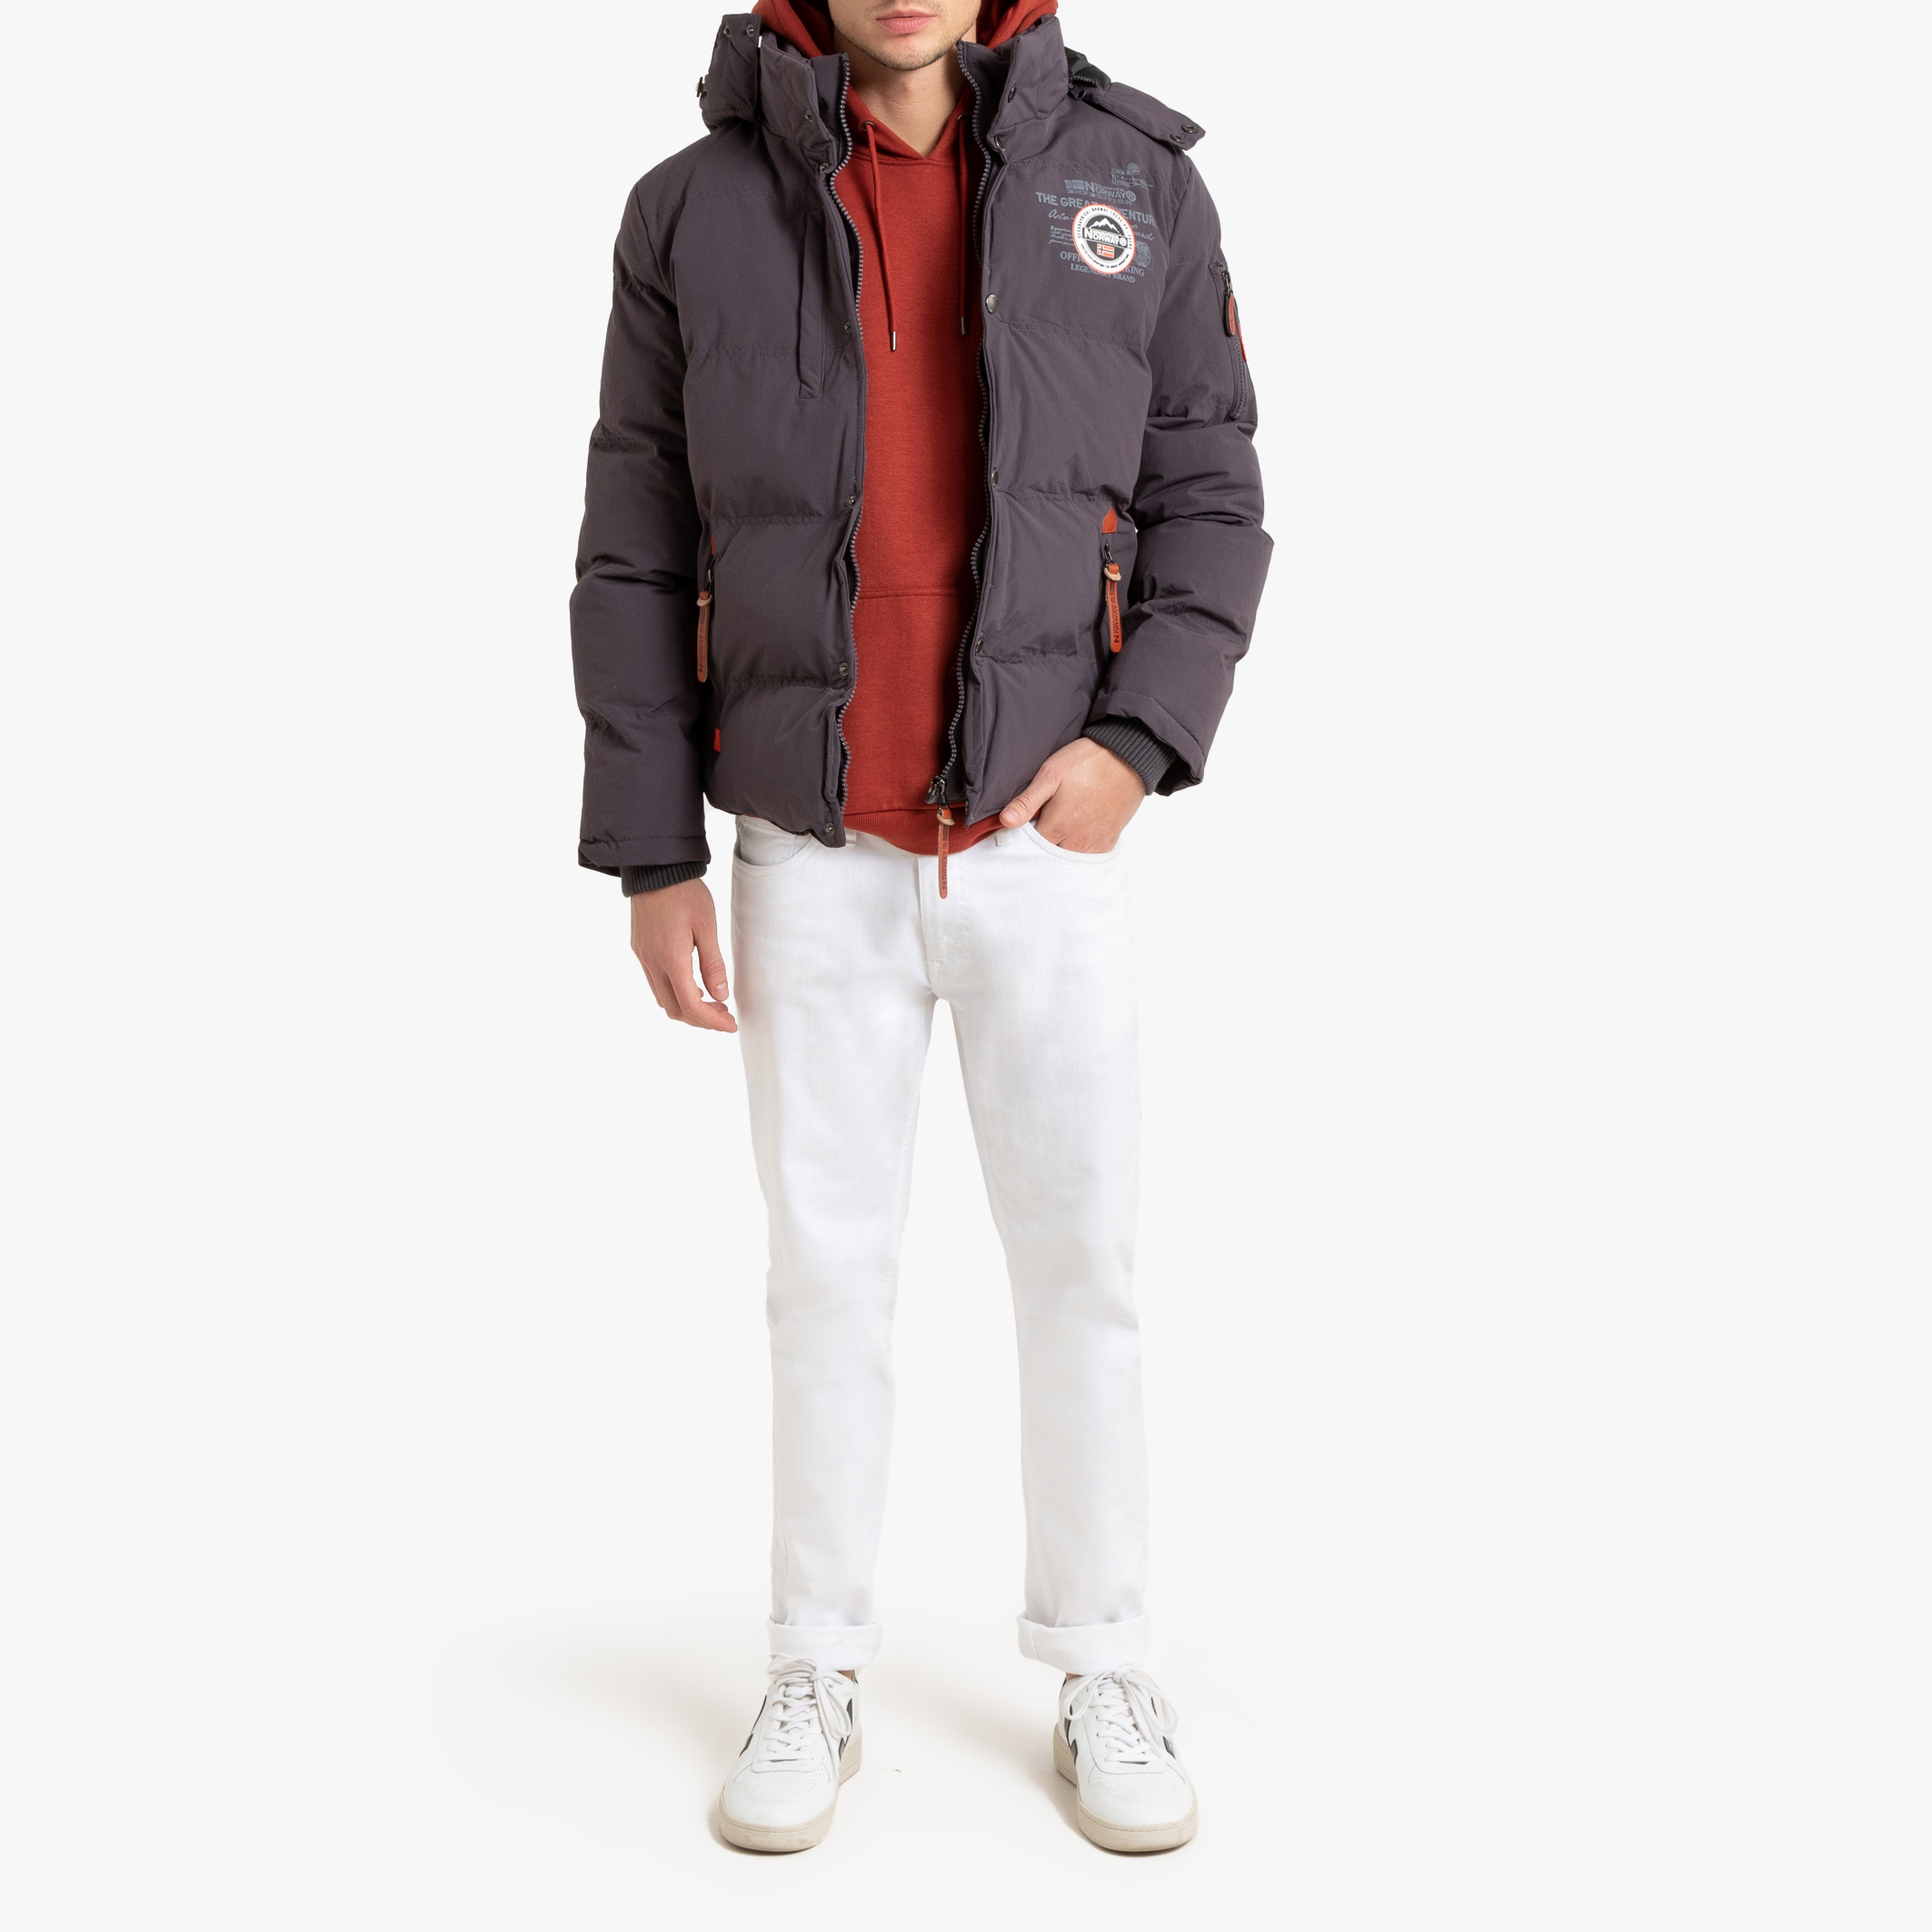 Visita lo Store di Geographical NorwayGeographical Norway Parka Uomo VERVEINE 